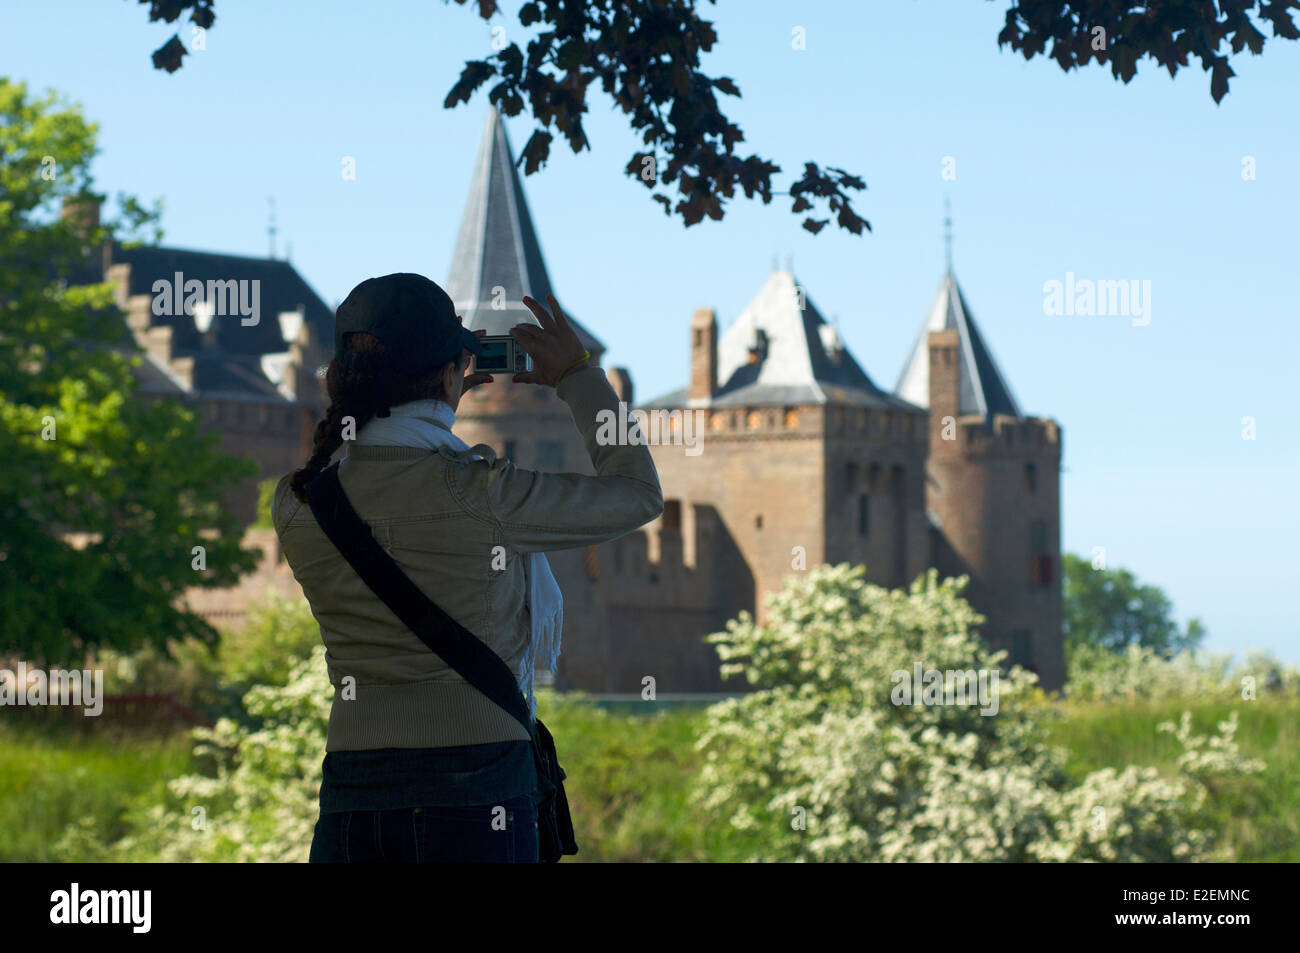 Woman photographing the Muiderslot castle in Muiden, The Netherlands Stock Photo